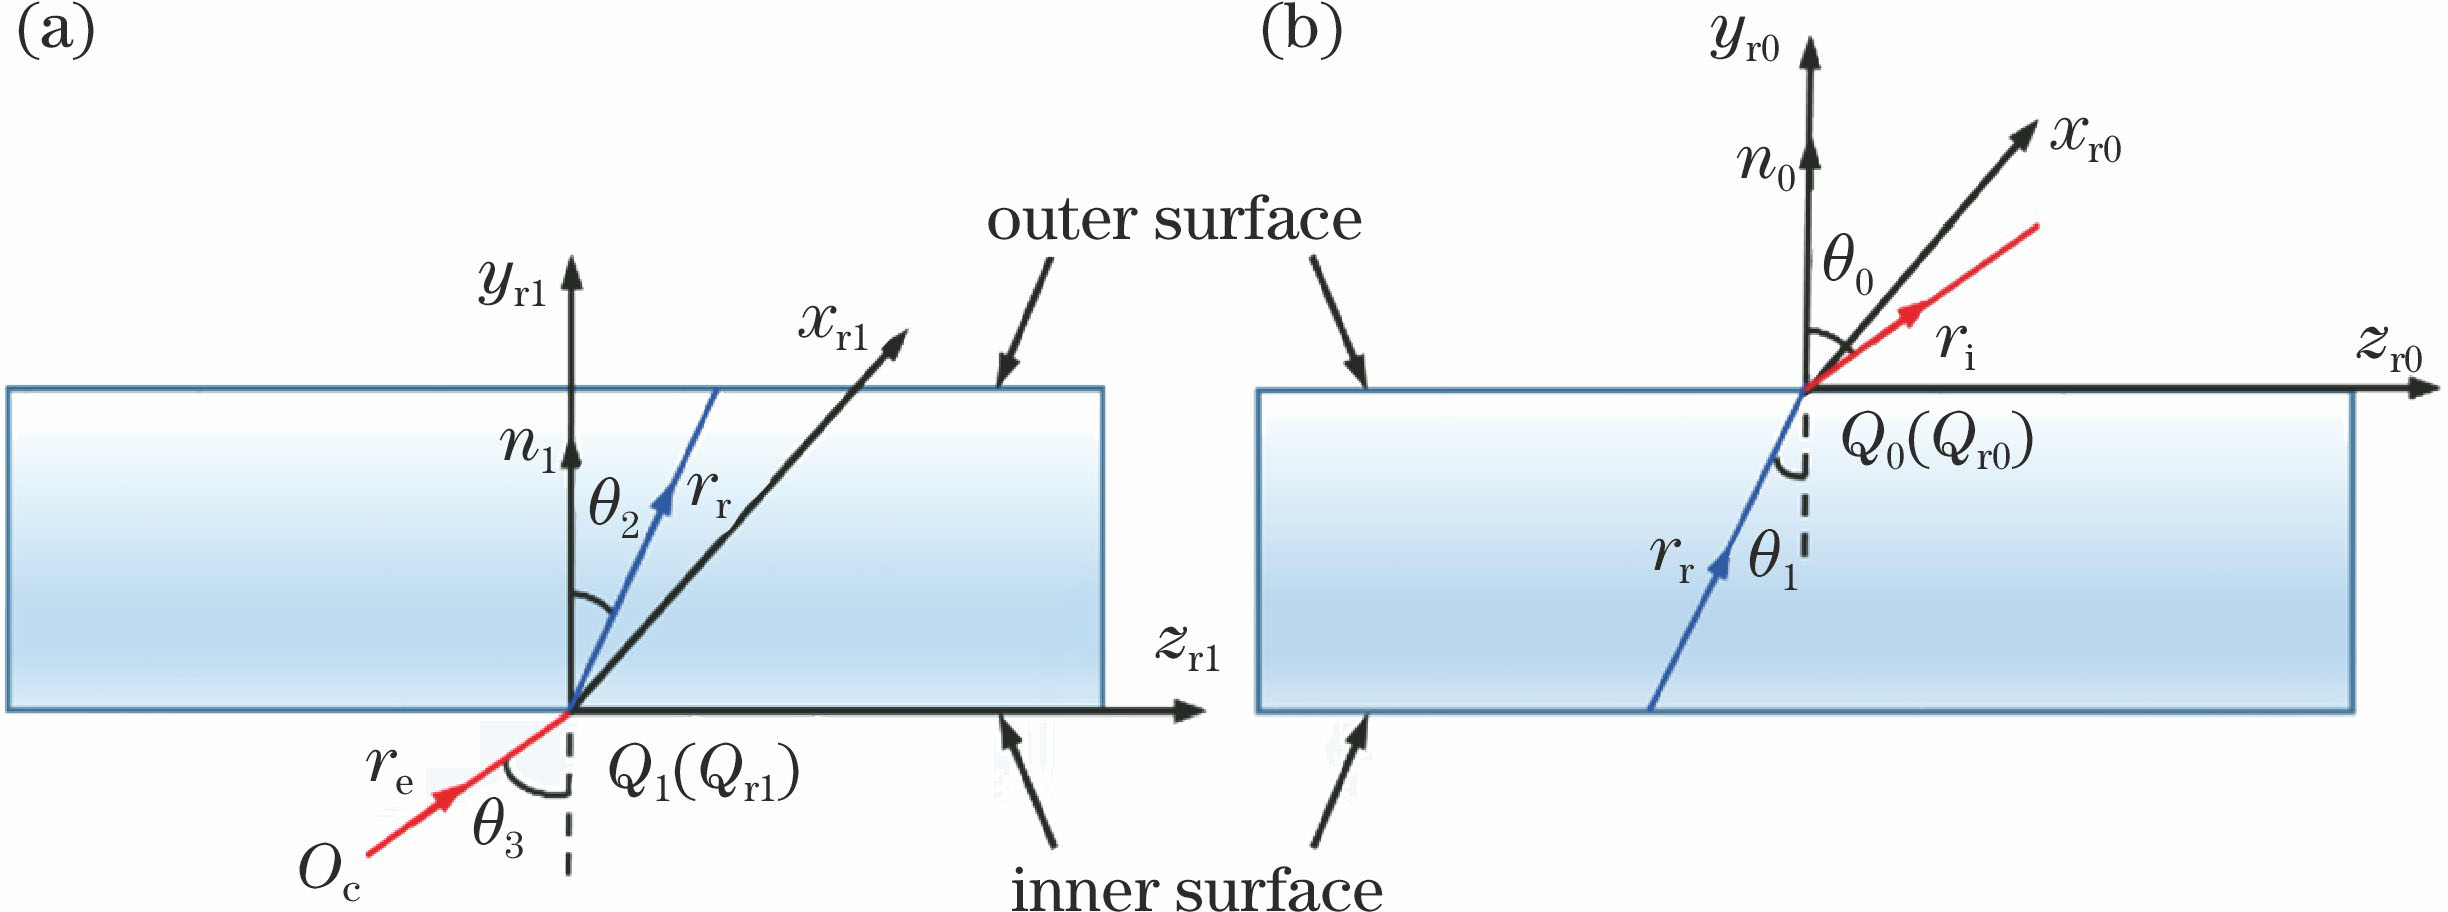 Two non-coplanar refraction planes. (a) Refraction at Q1; (b) refraction at Q0